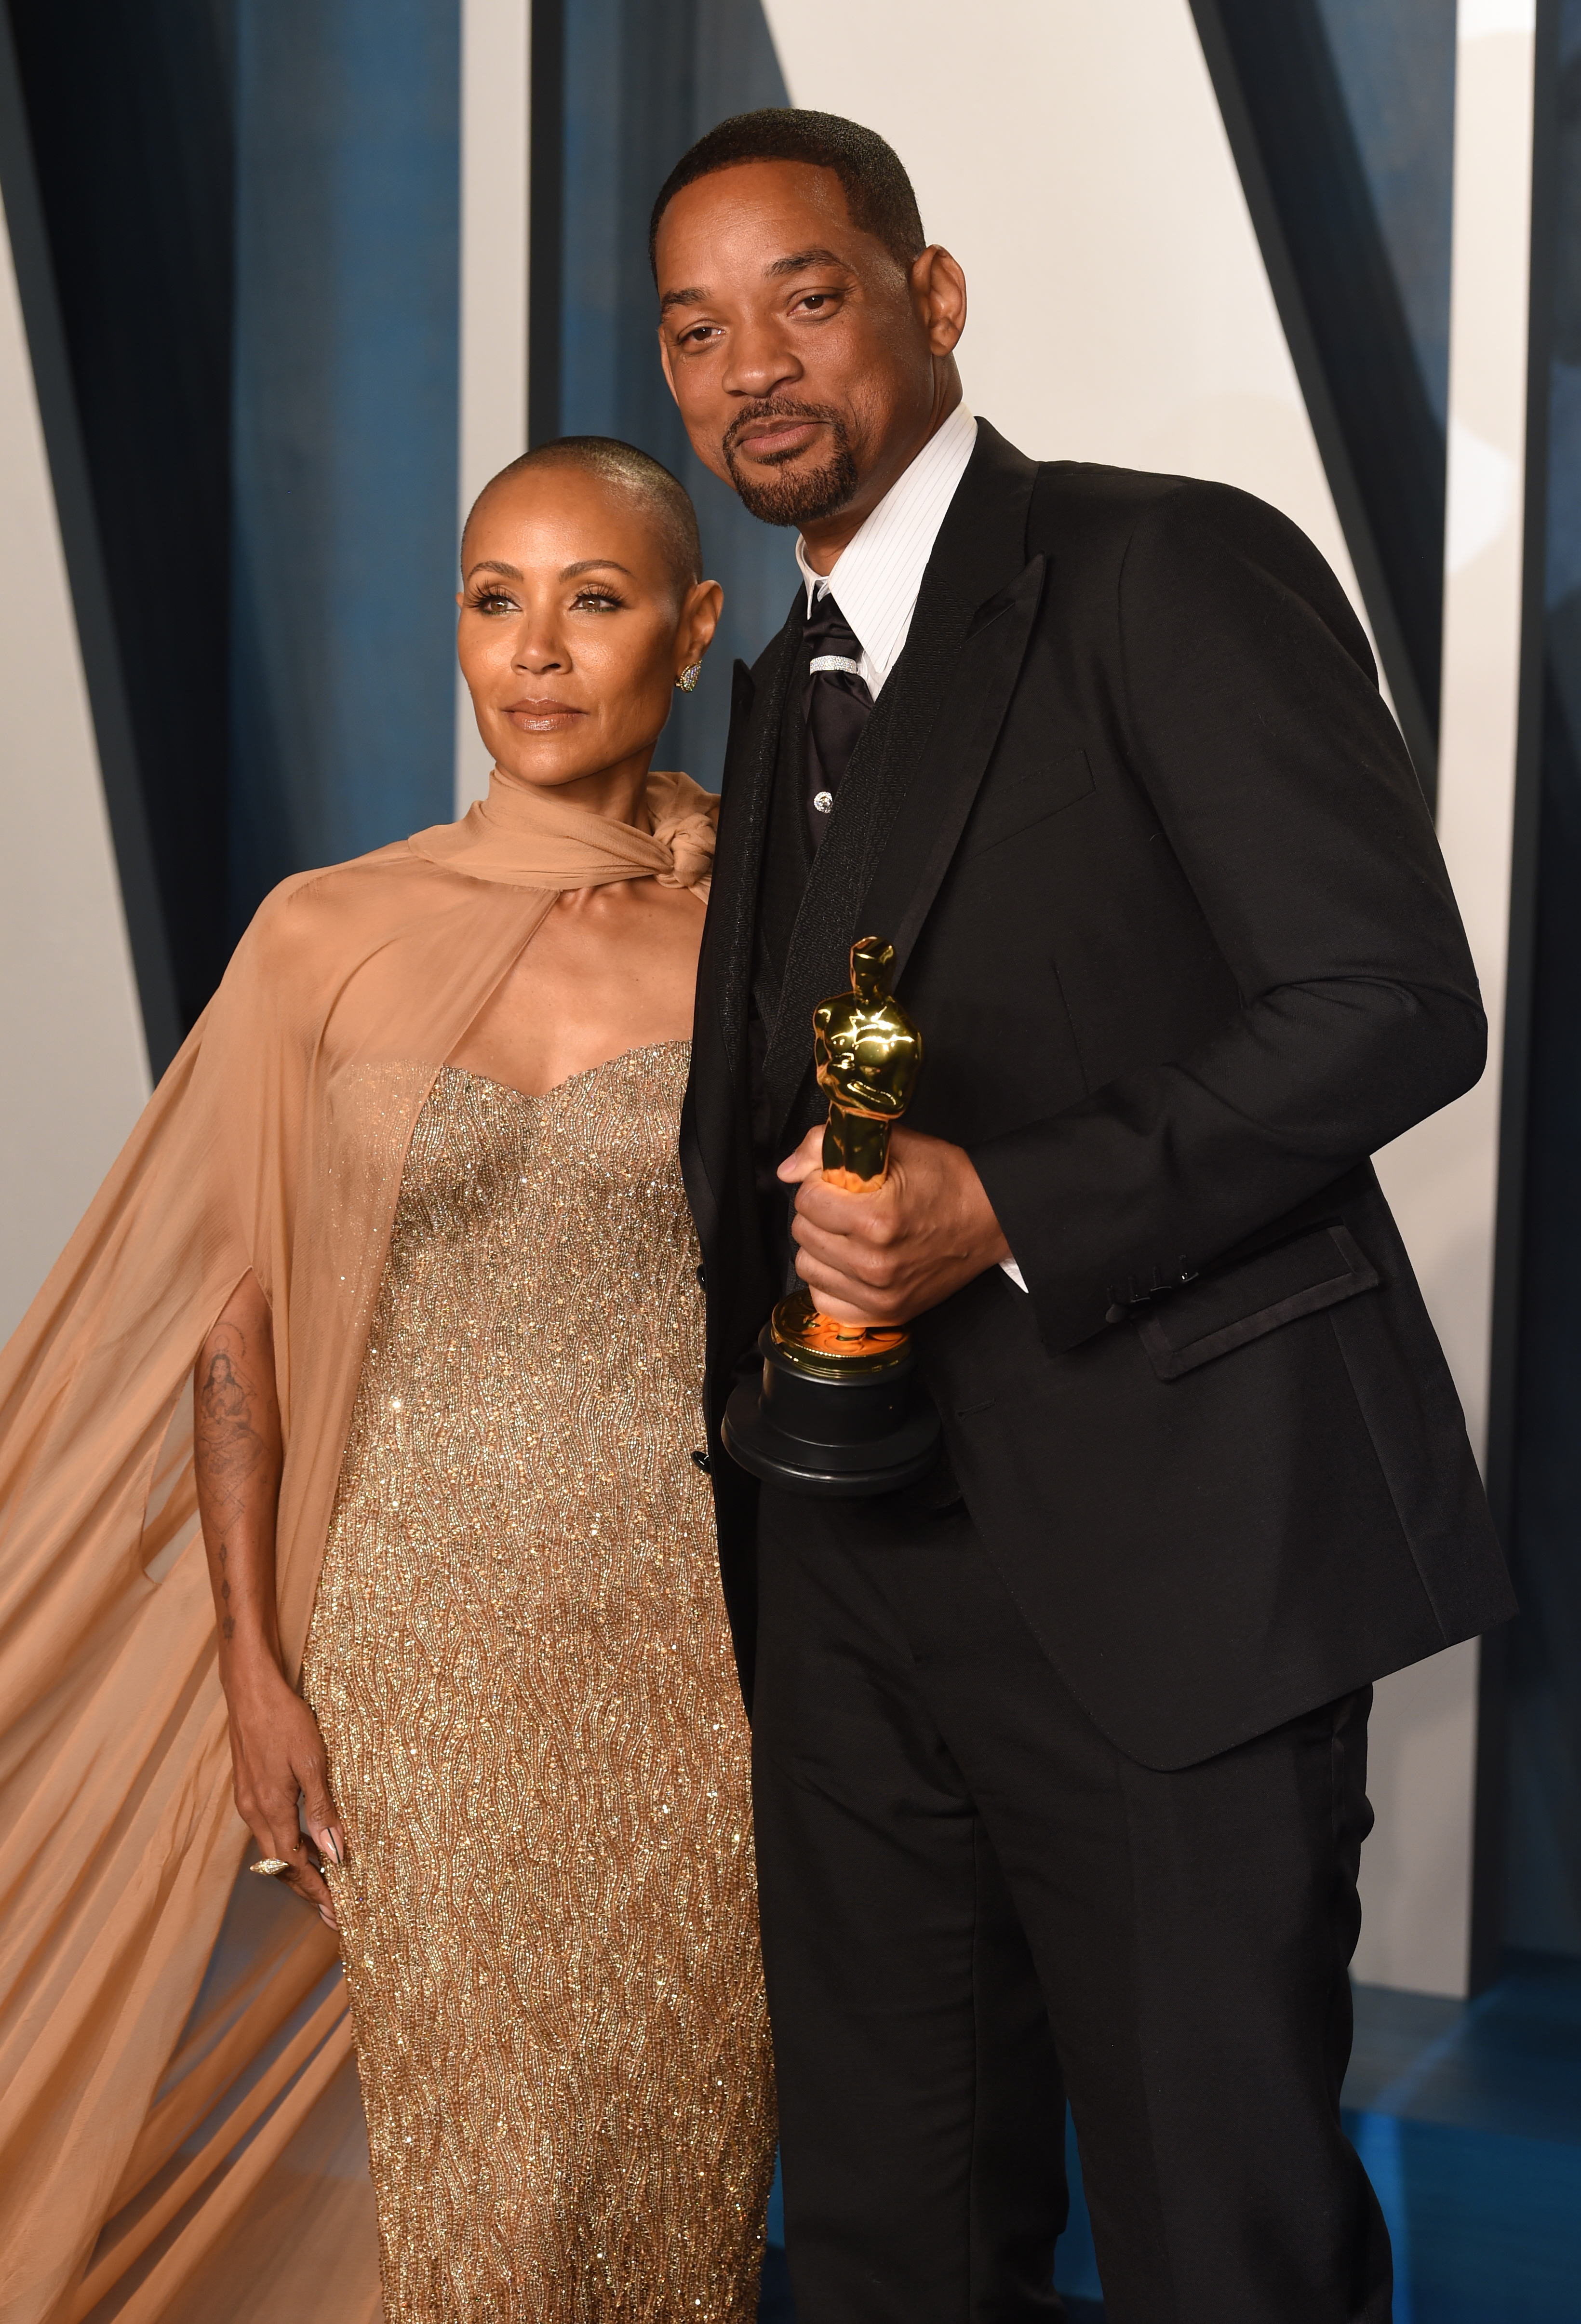 Close-up of Will holding an Oscar while posing for photographers with Jada